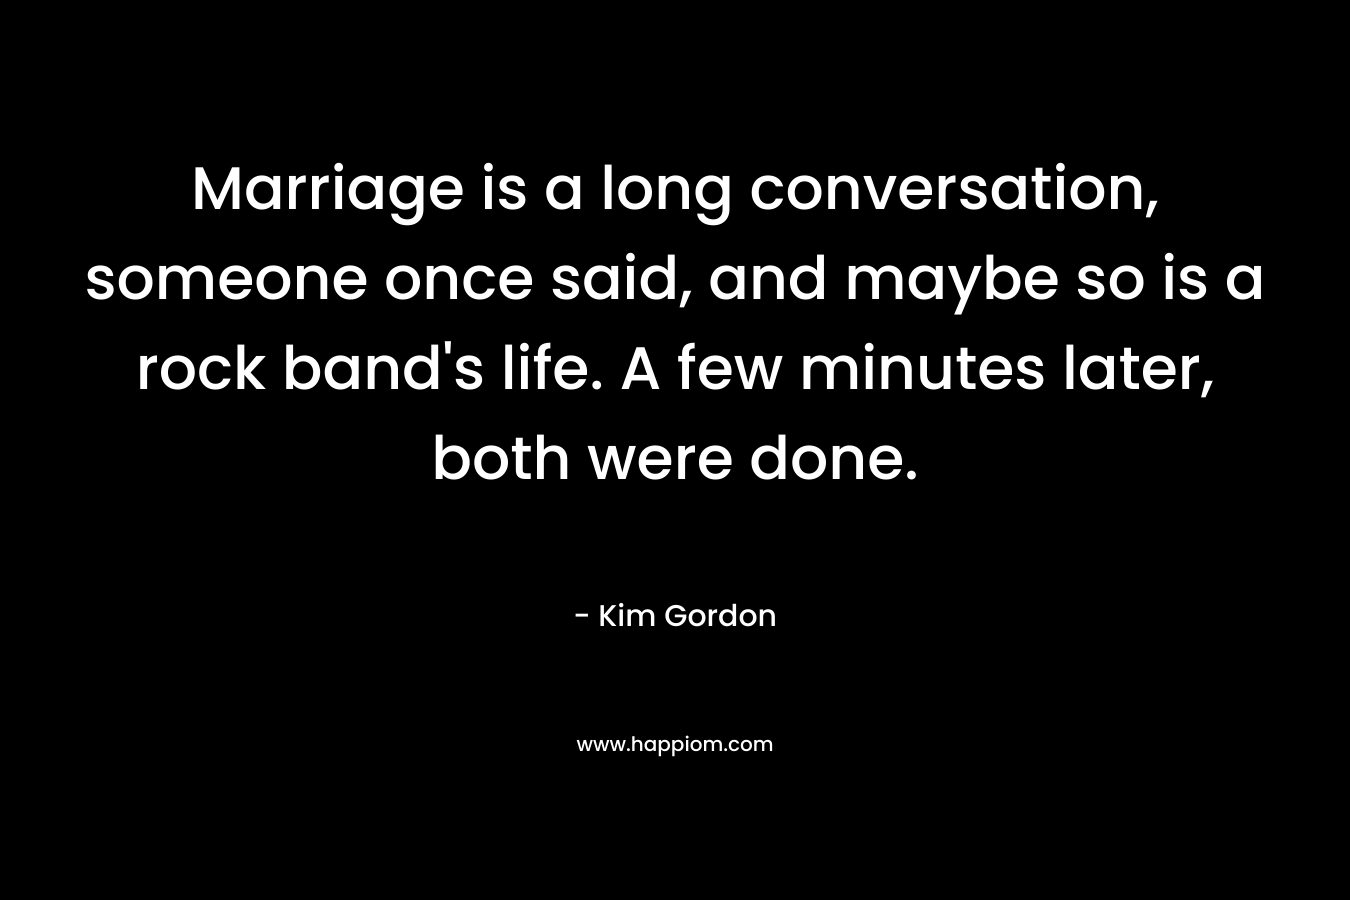 Marriage is a long conversation, someone once said, and maybe so is a rock band's life. A few minutes later, both were done.